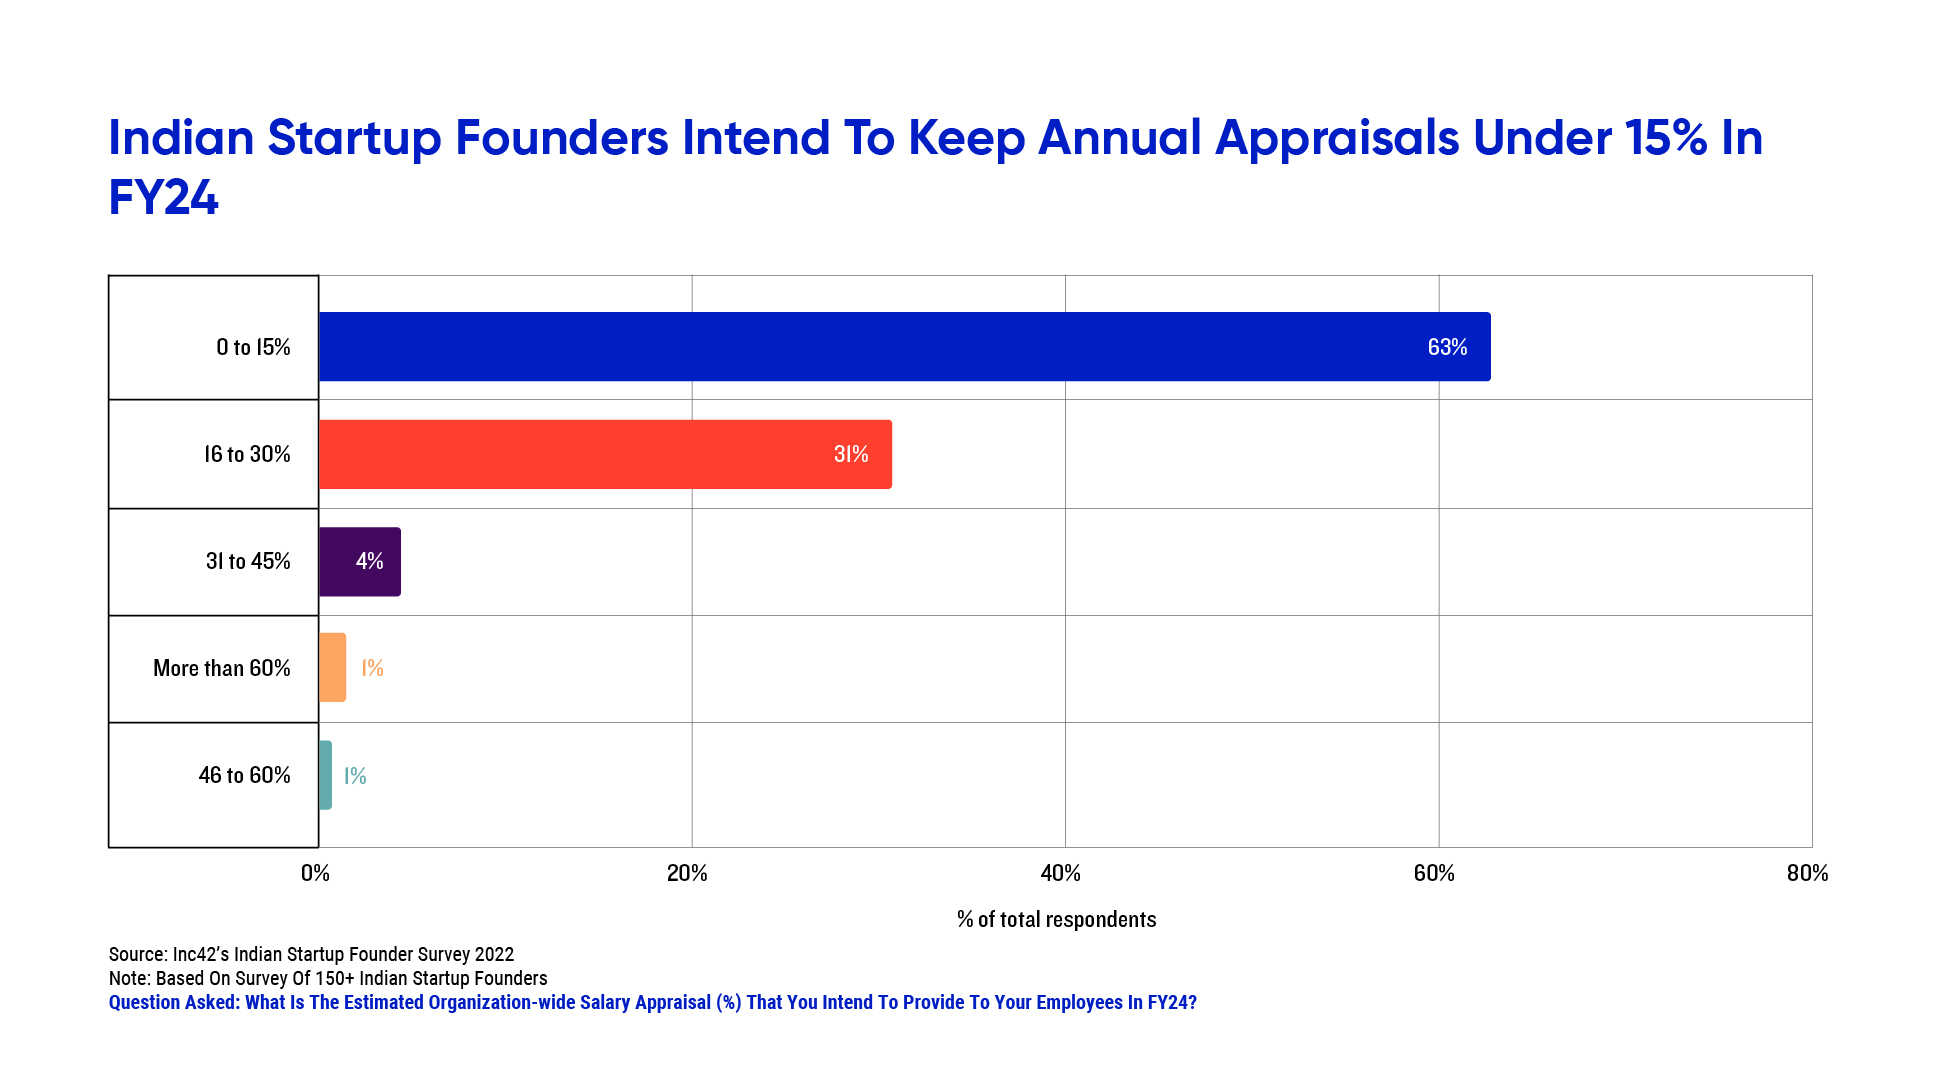 s many as 63% of Indian founders said that they intend to keep annual appraisals under 15% in FY24.